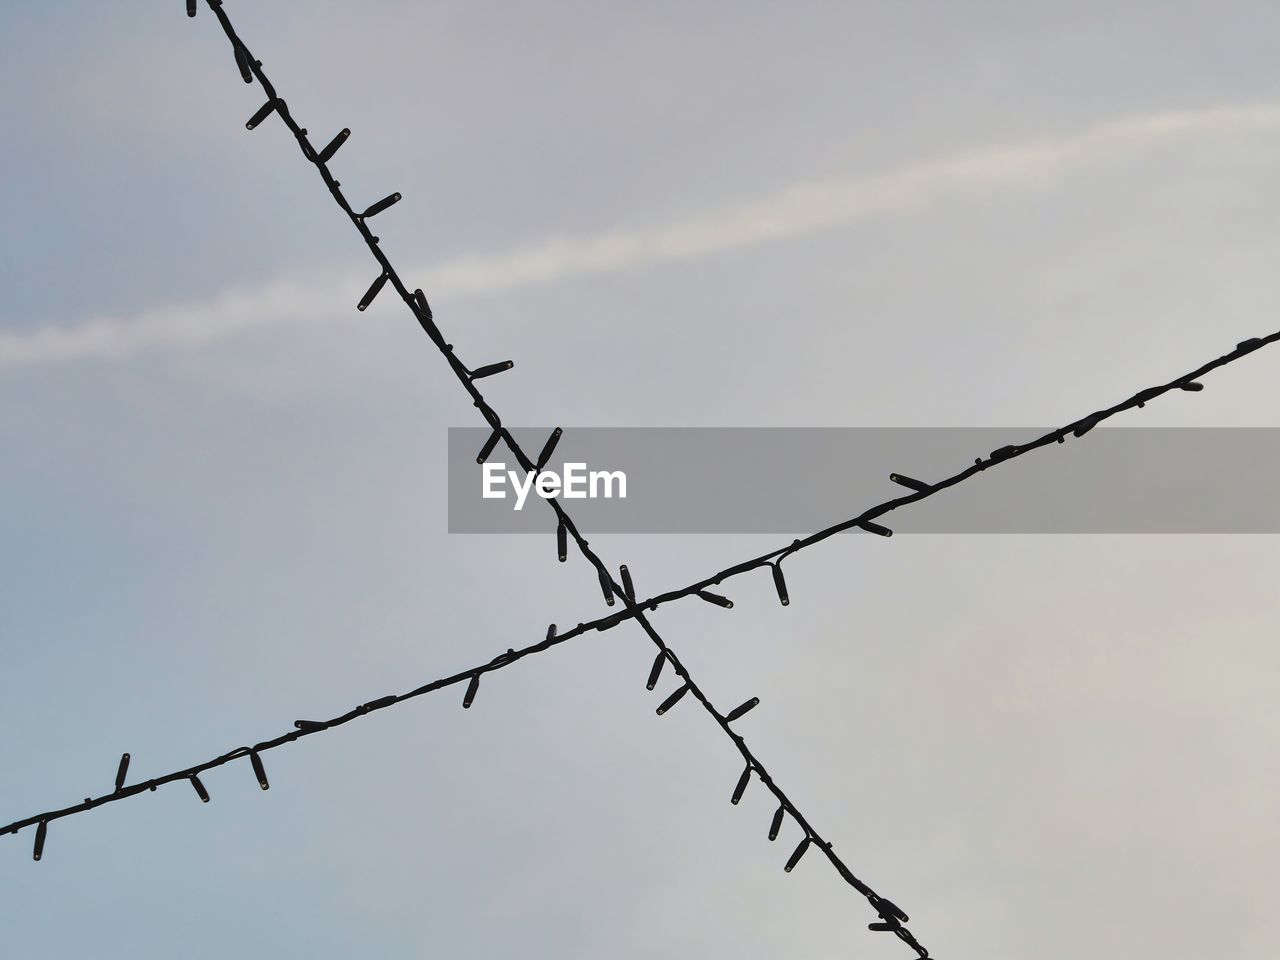 wire, protection, wire fencing, barbed wire, security, fence, sky, branch, outdoor structure, metal, no people, nature, sharp, line, home fencing, twig, warning sign, sign, communication, forbidden, low angle view, electricity, outdoors, day, silhouette, overhead power line, wire mesh, cloud, technology